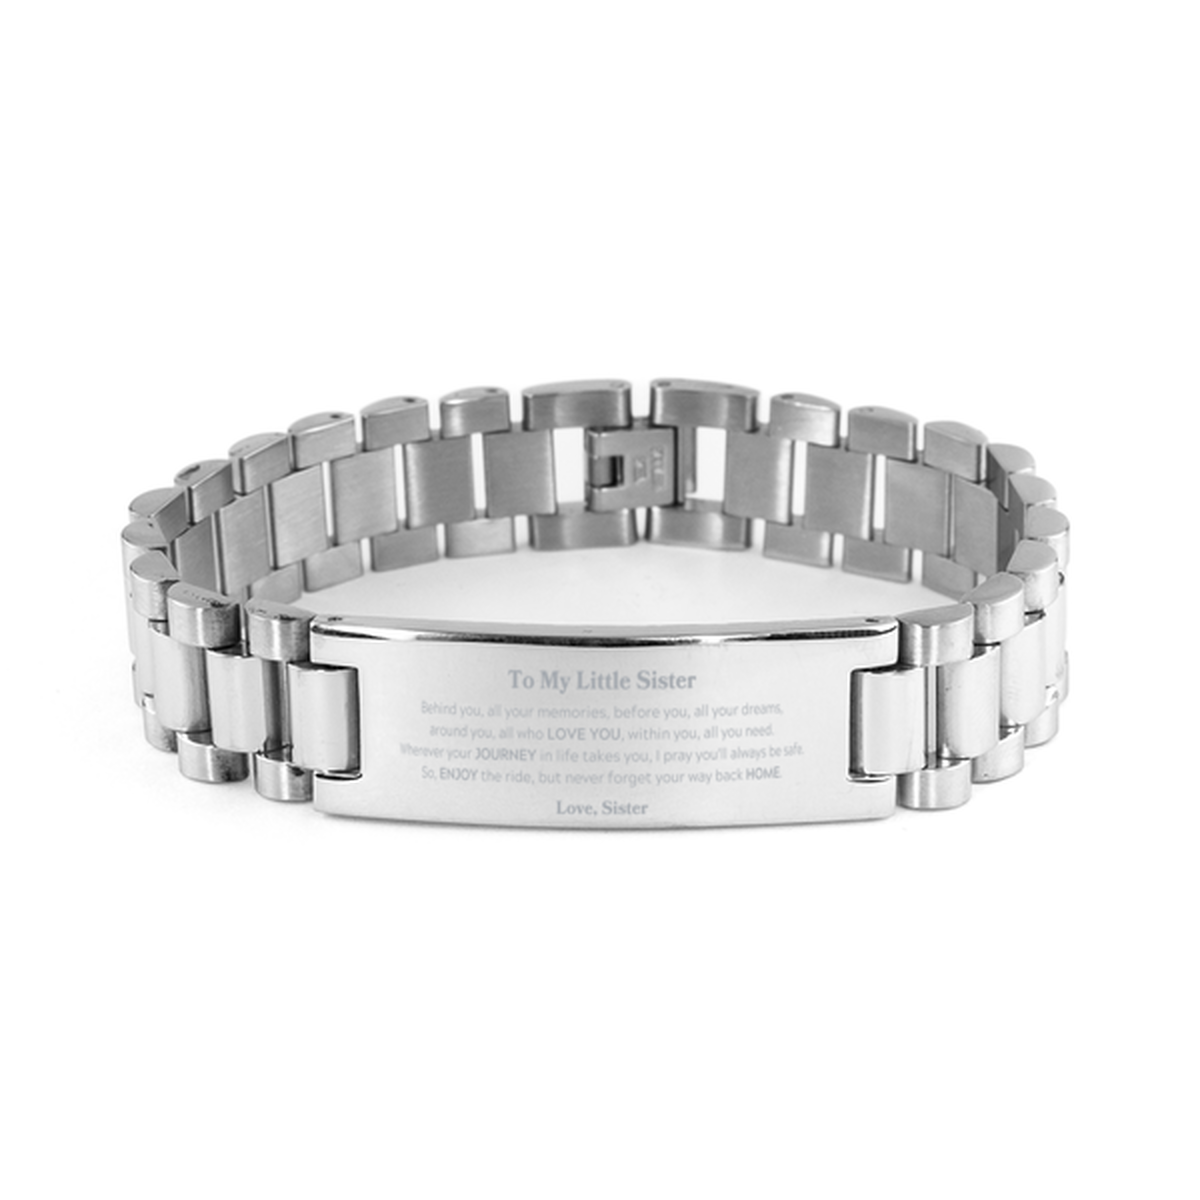 To My Little Sister Graduation Gifts from Sister, Little Sister Ladder Stainless Steel Bracelet Christmas Birthday Gifts for Little Sister Behind you, all your memories, before you, all your dreams. Love, Sister